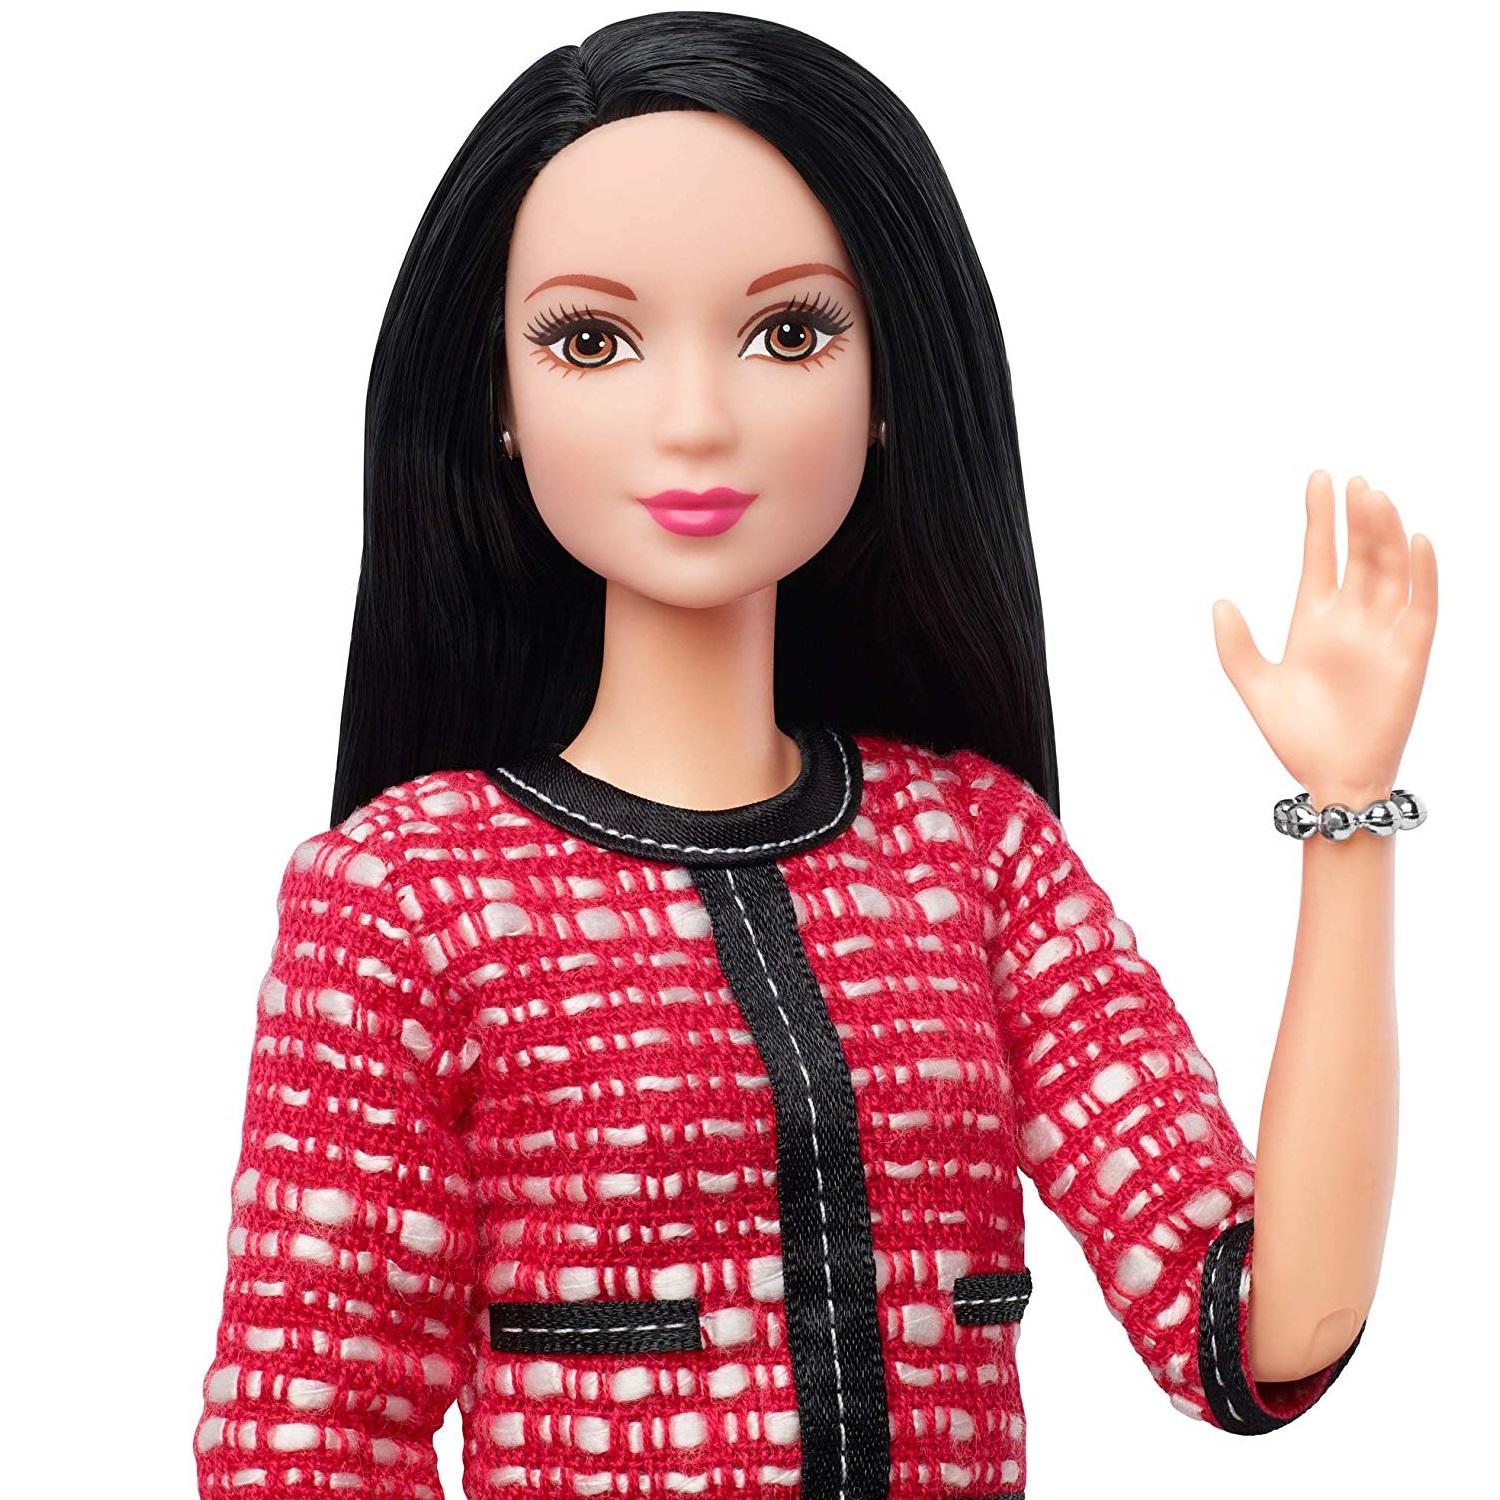 Barbie 60th Anniversary Political Candidate Doll2